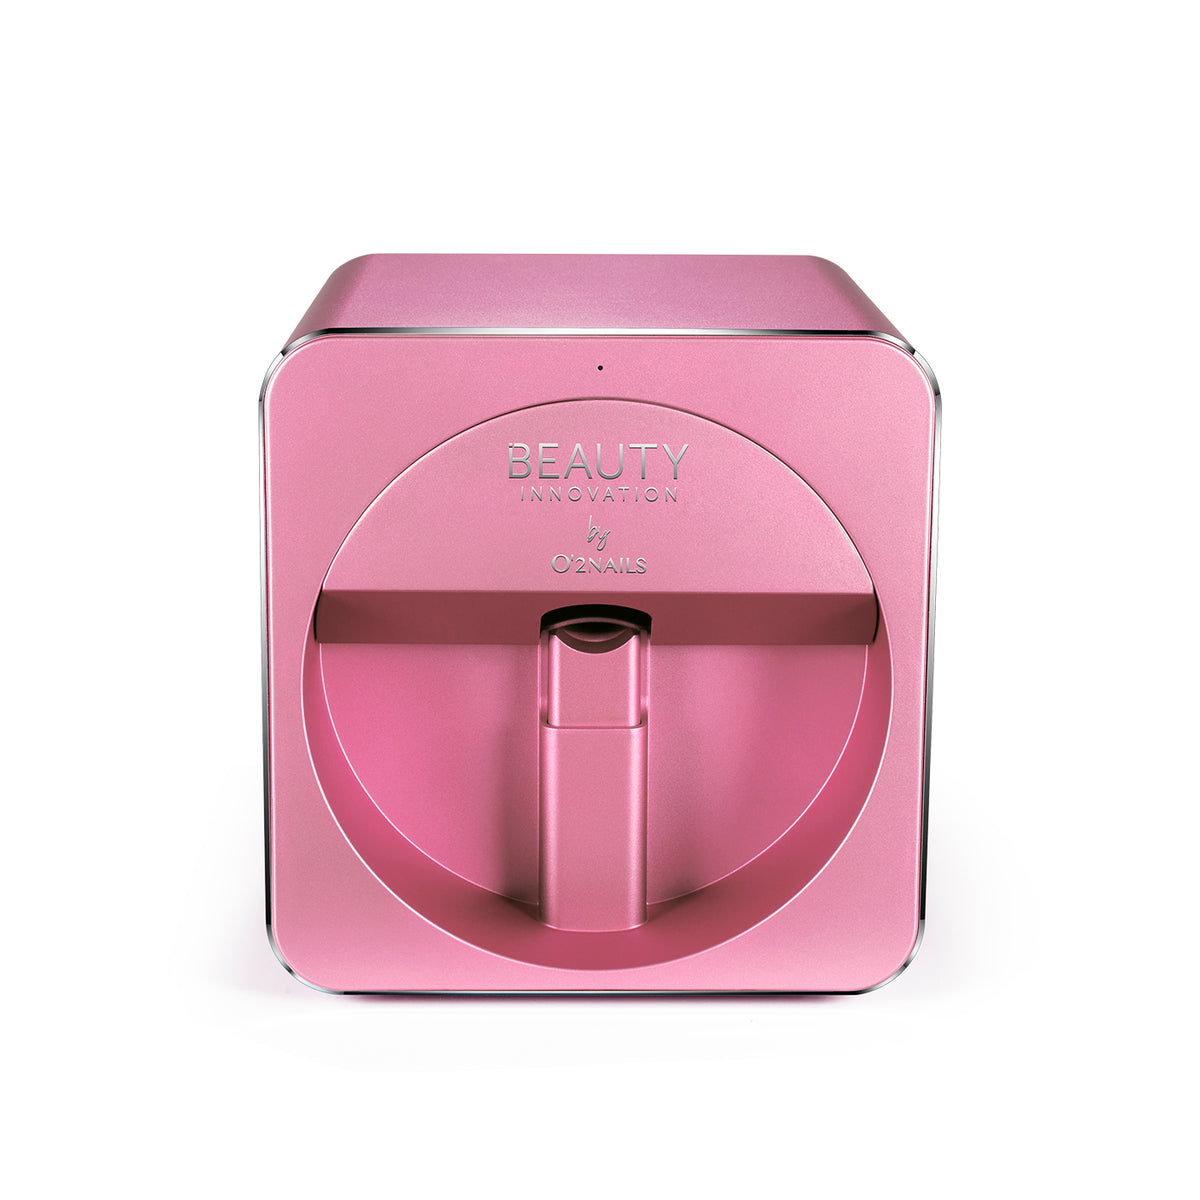 Replace Your Manicurist With This $500 Nail-Art Printer From Japan